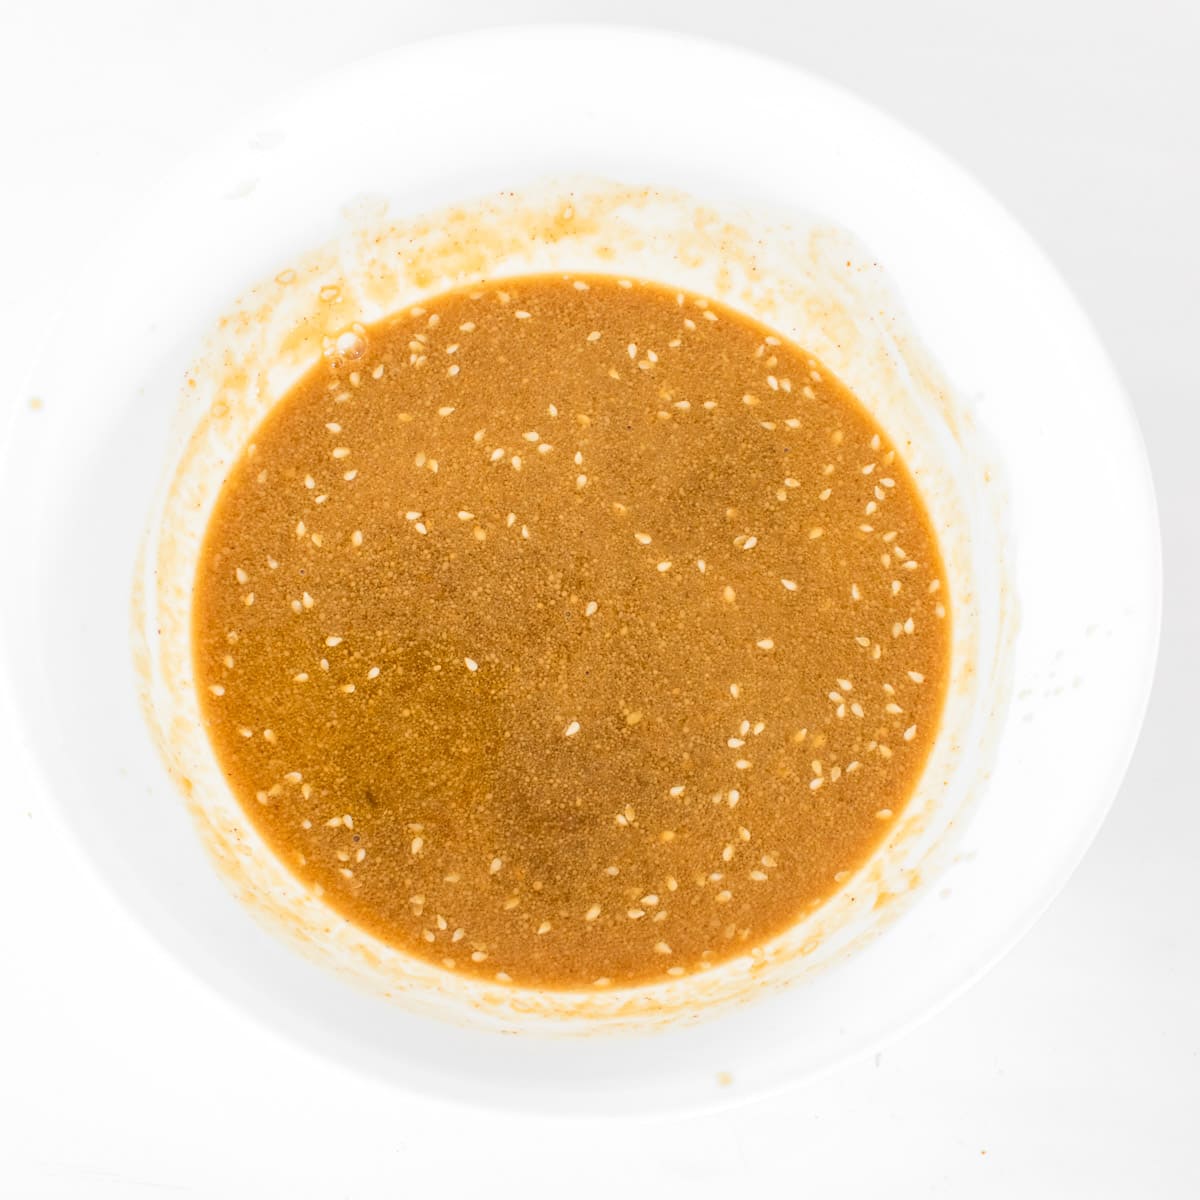 whisked sauce in a mixing bowl.